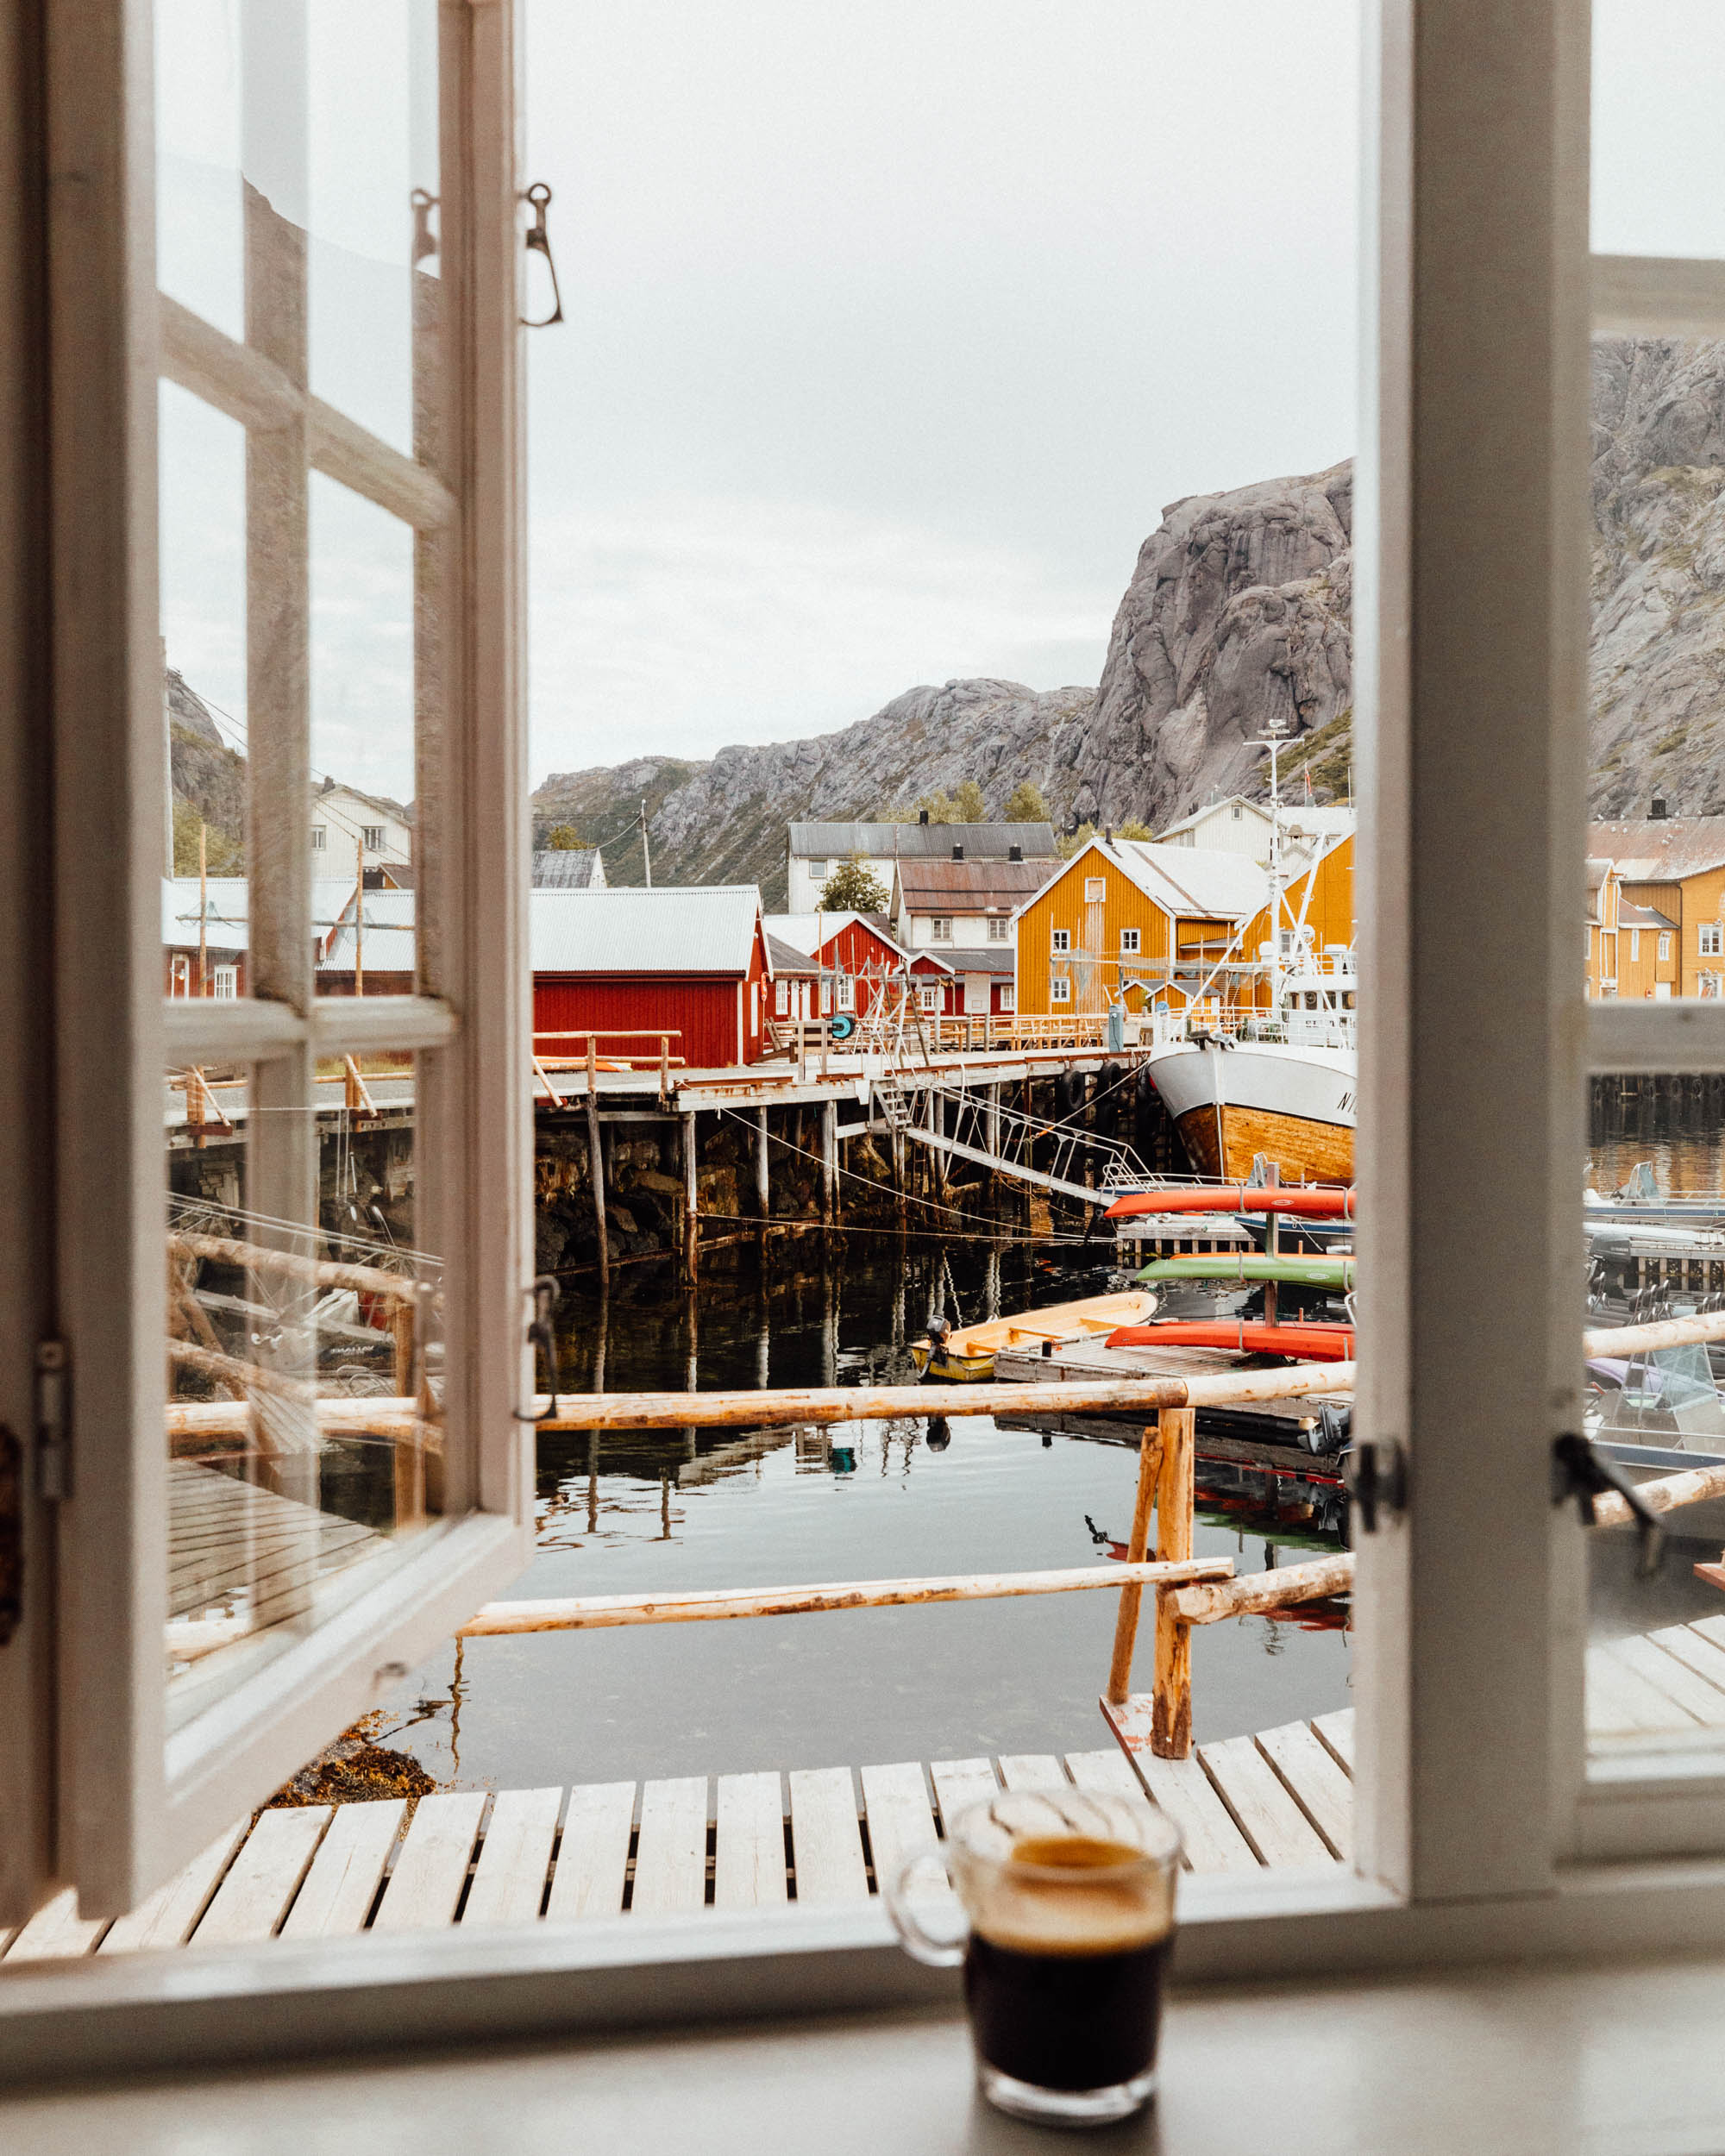 View from Hotel in Lofoten Norway Nusfjord Arctic Resort Traditional Fishermen Red Cabin with a Fjord View - Find Us Lost